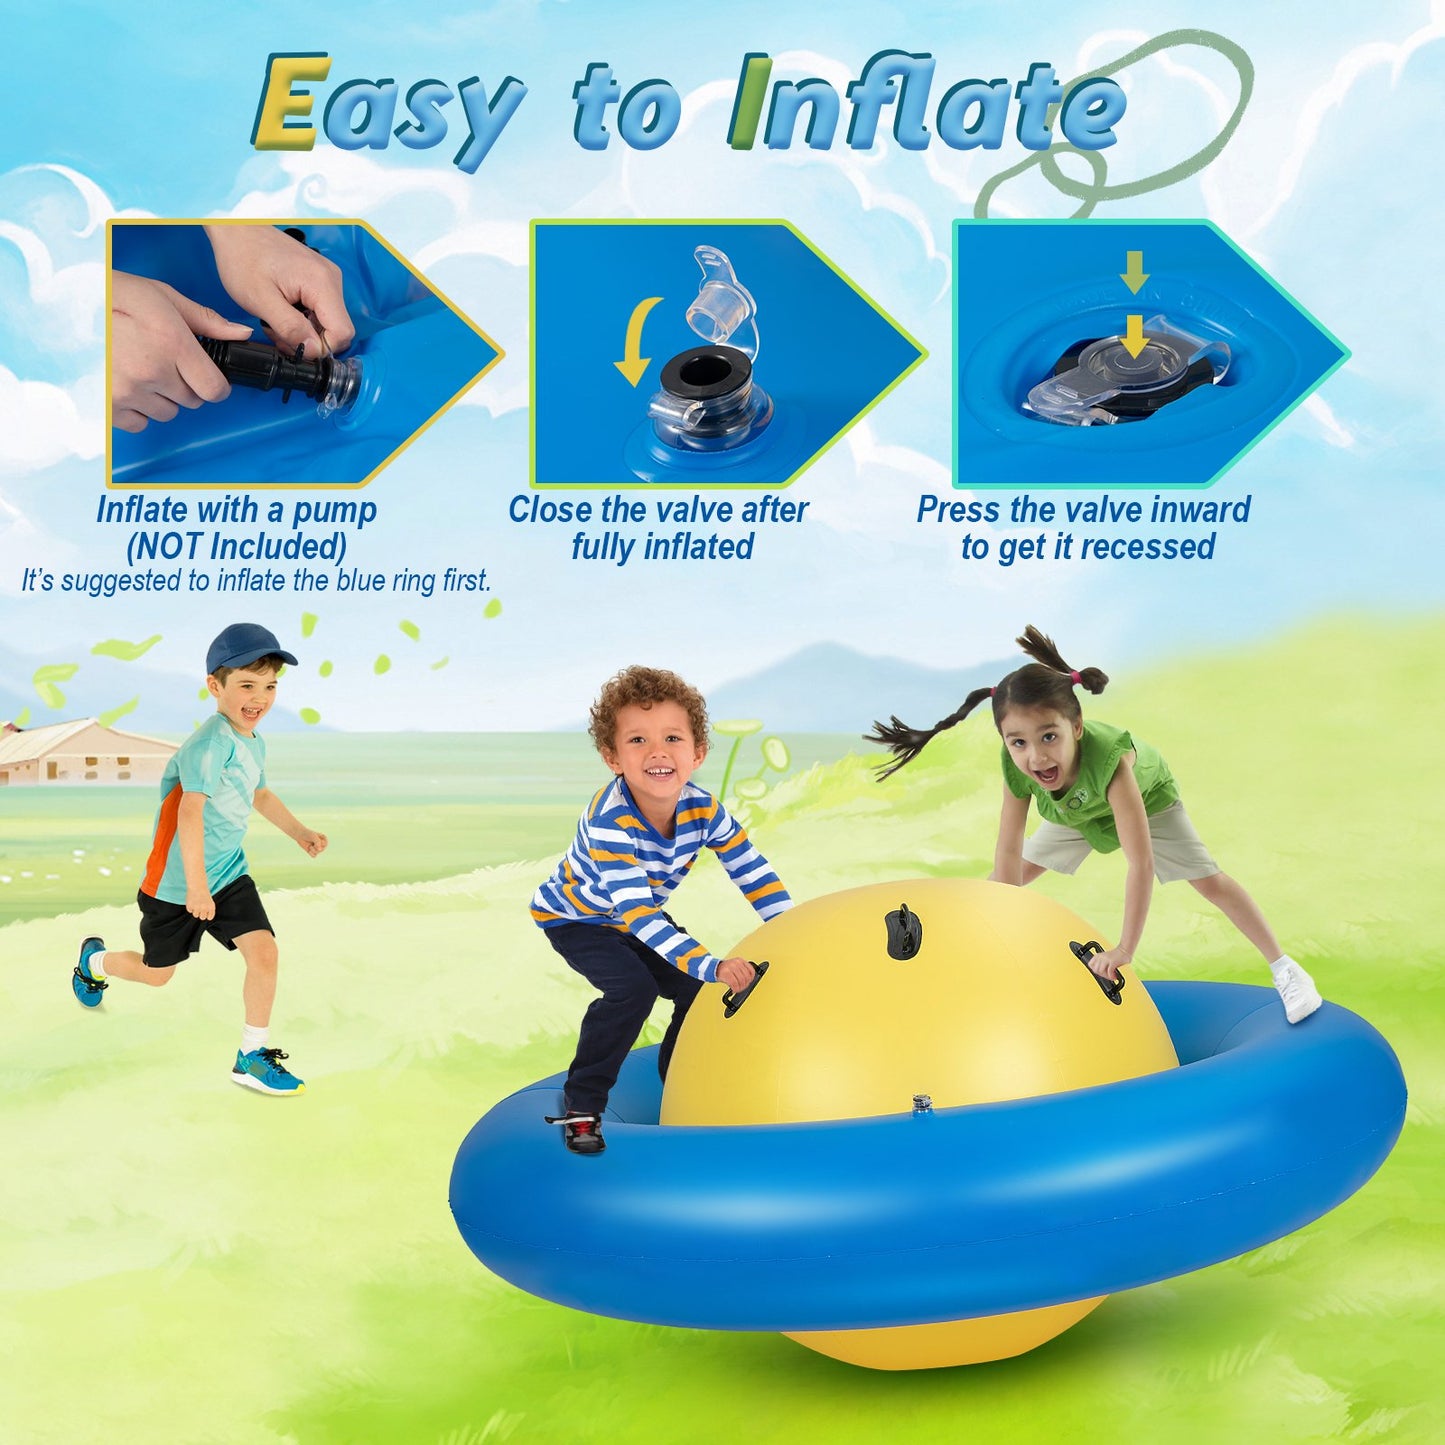 7.5 Foot Giant Inflatable Dome Rocker Bouncer with 6 Built-in Handles for Kids, Blue